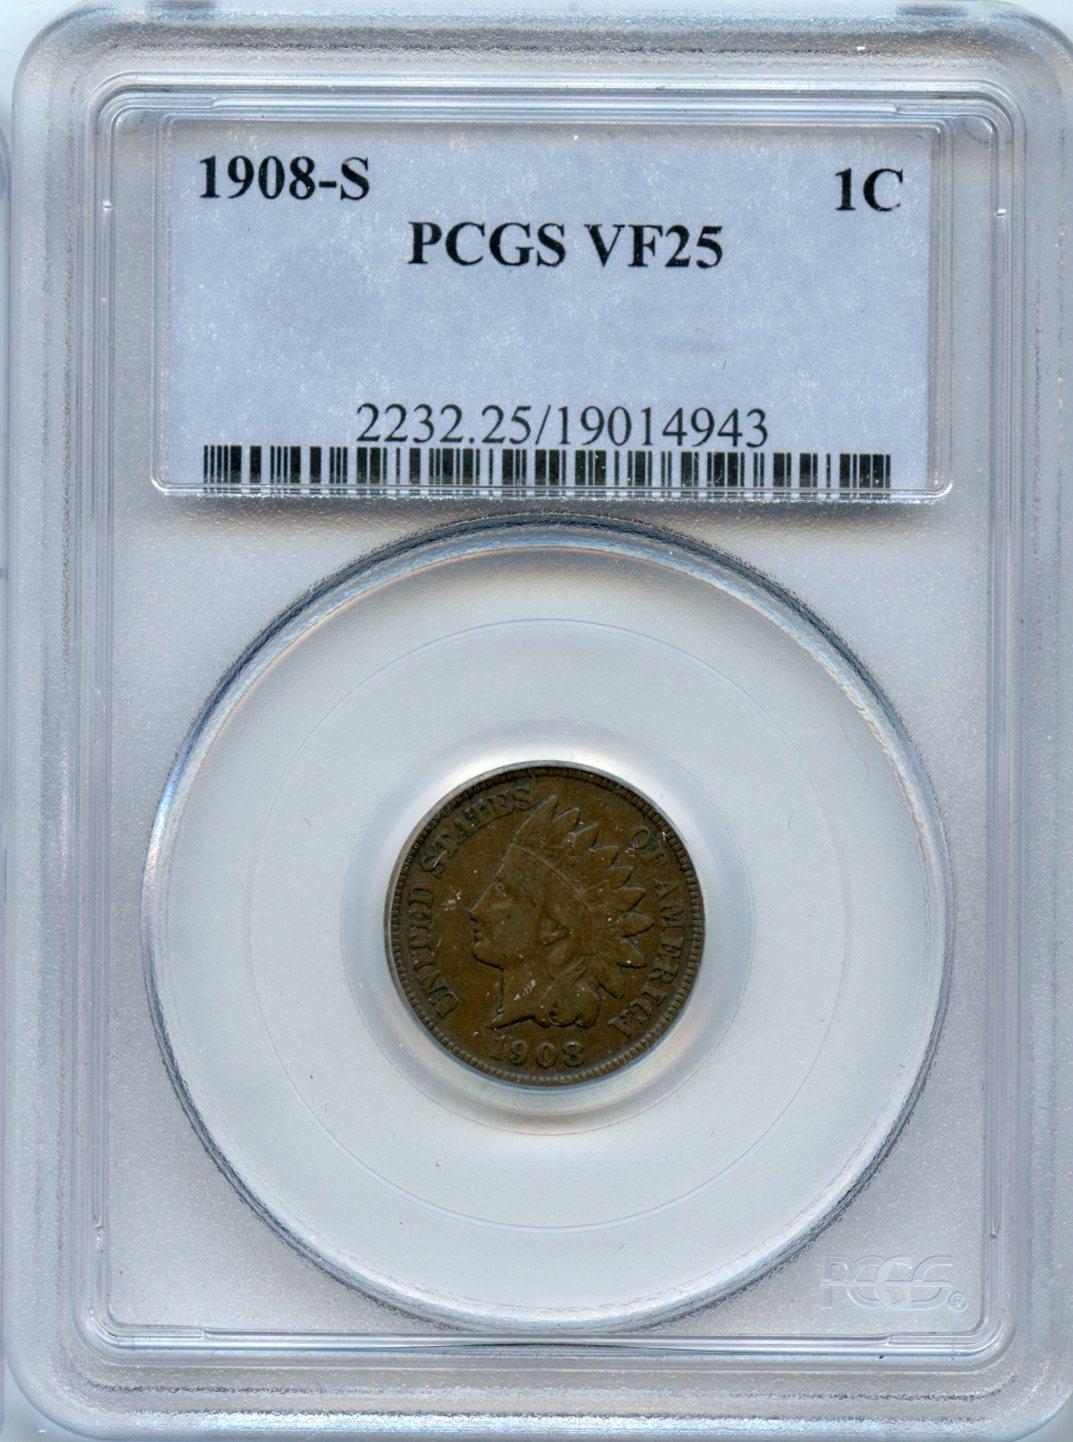 1908-S Indian Head Cent in PCGS VF 25